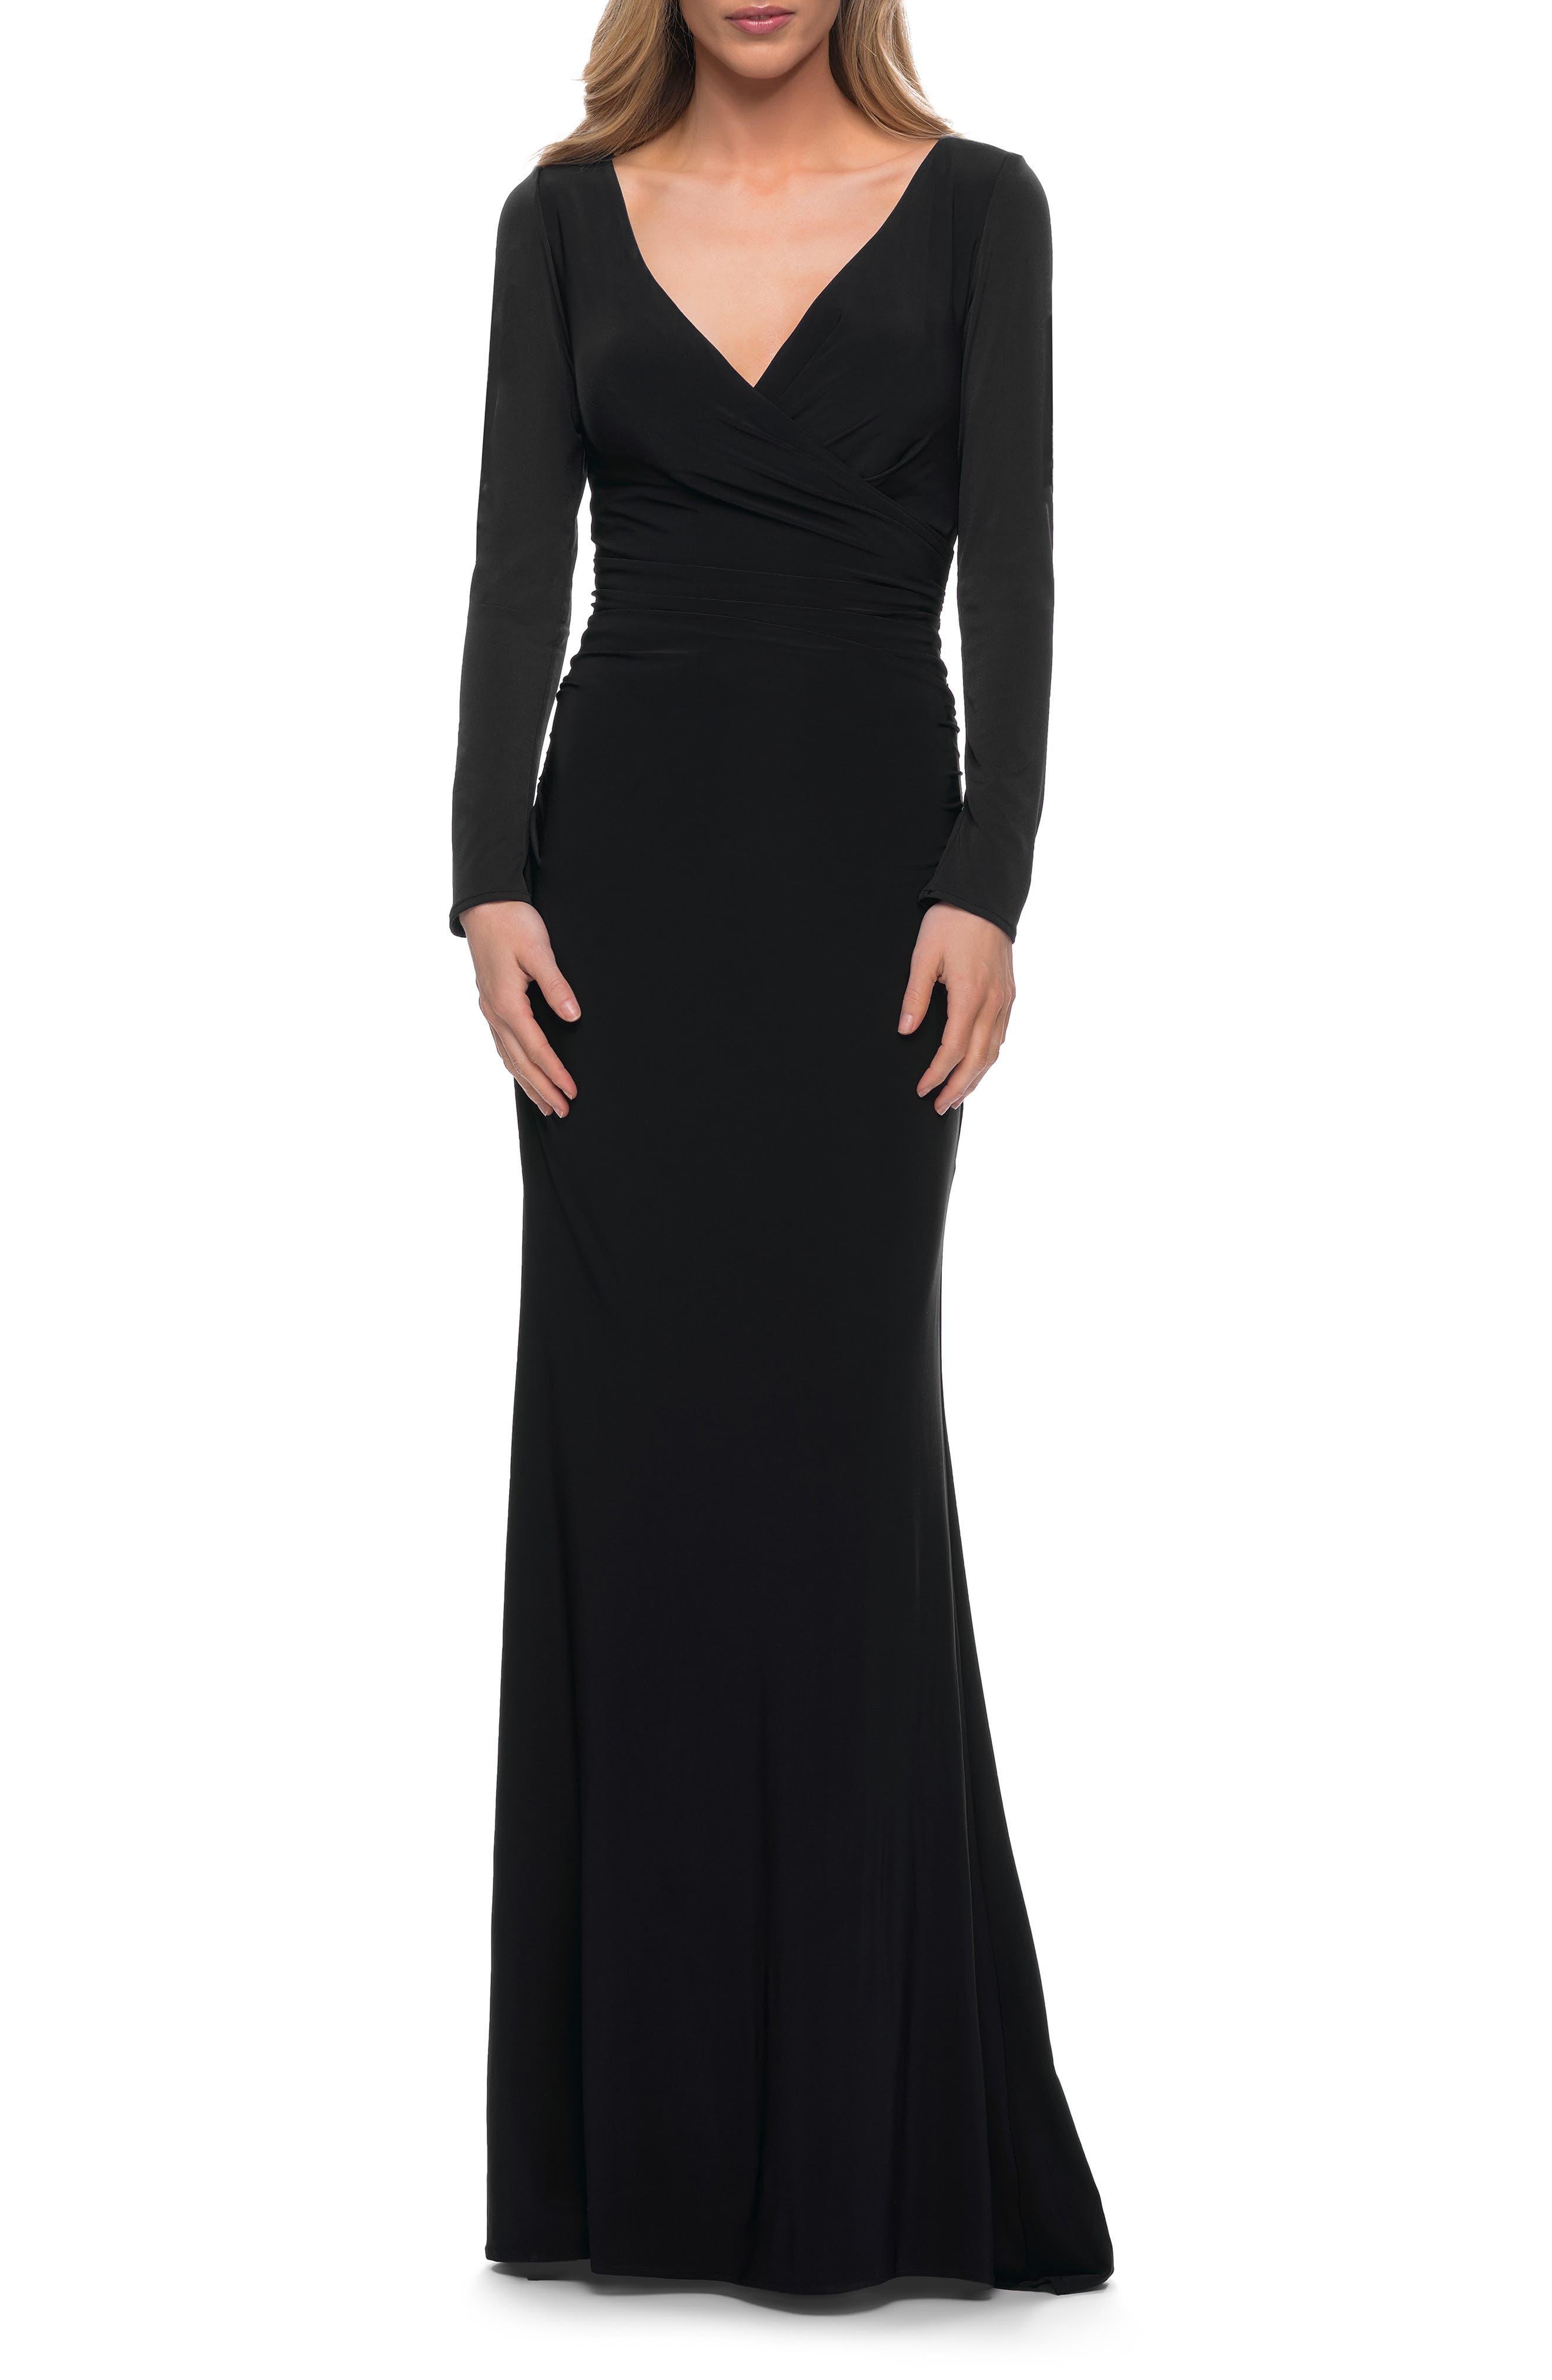 La Femme Long Sleeve Ruched Jersey Gown in Black | Lyst